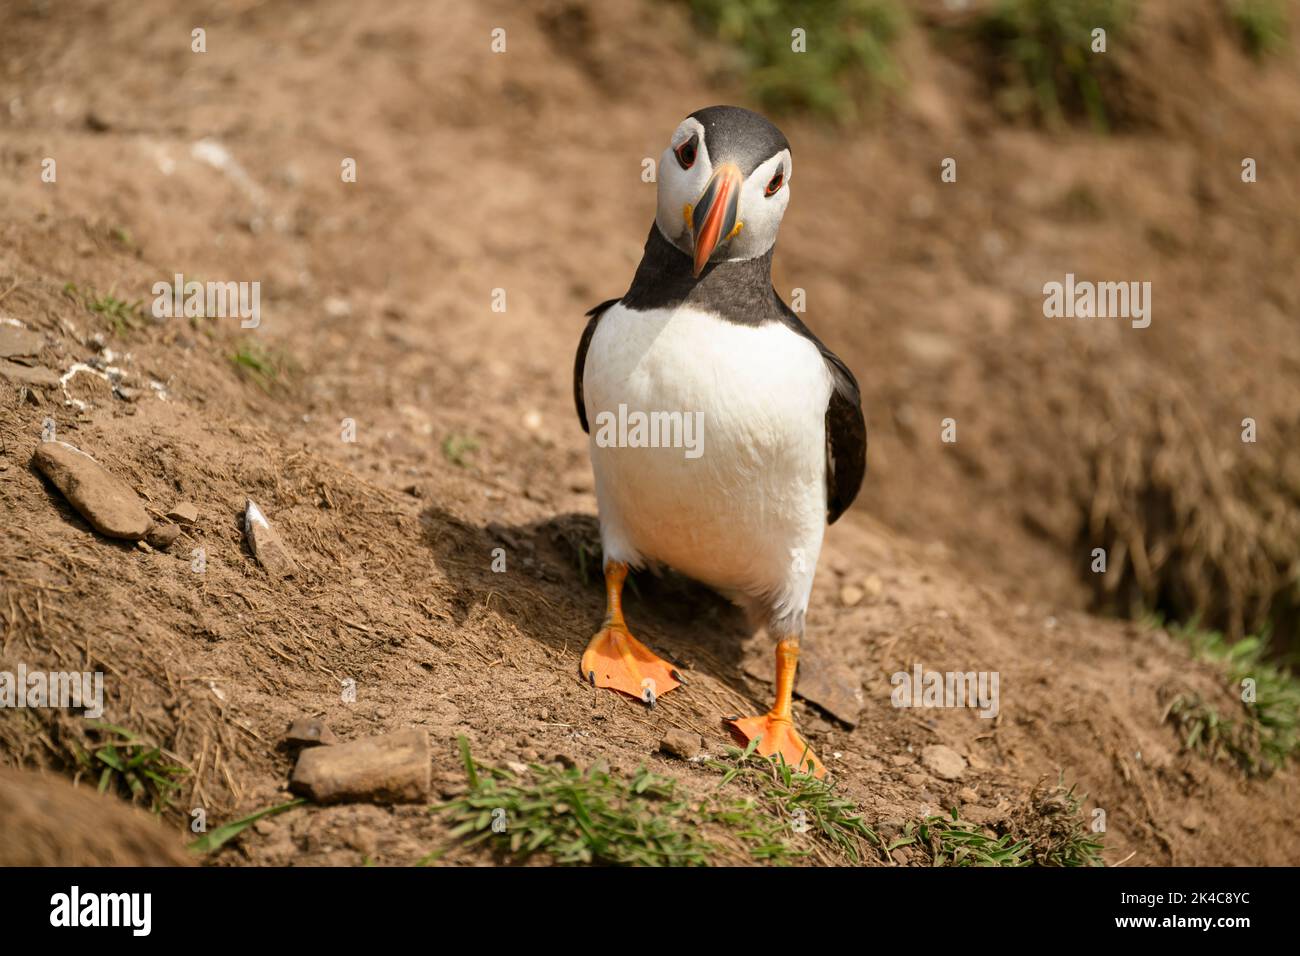 A closeup of adorable Atlantic puffin bird staring at the camera standing on the ground Stock Photo